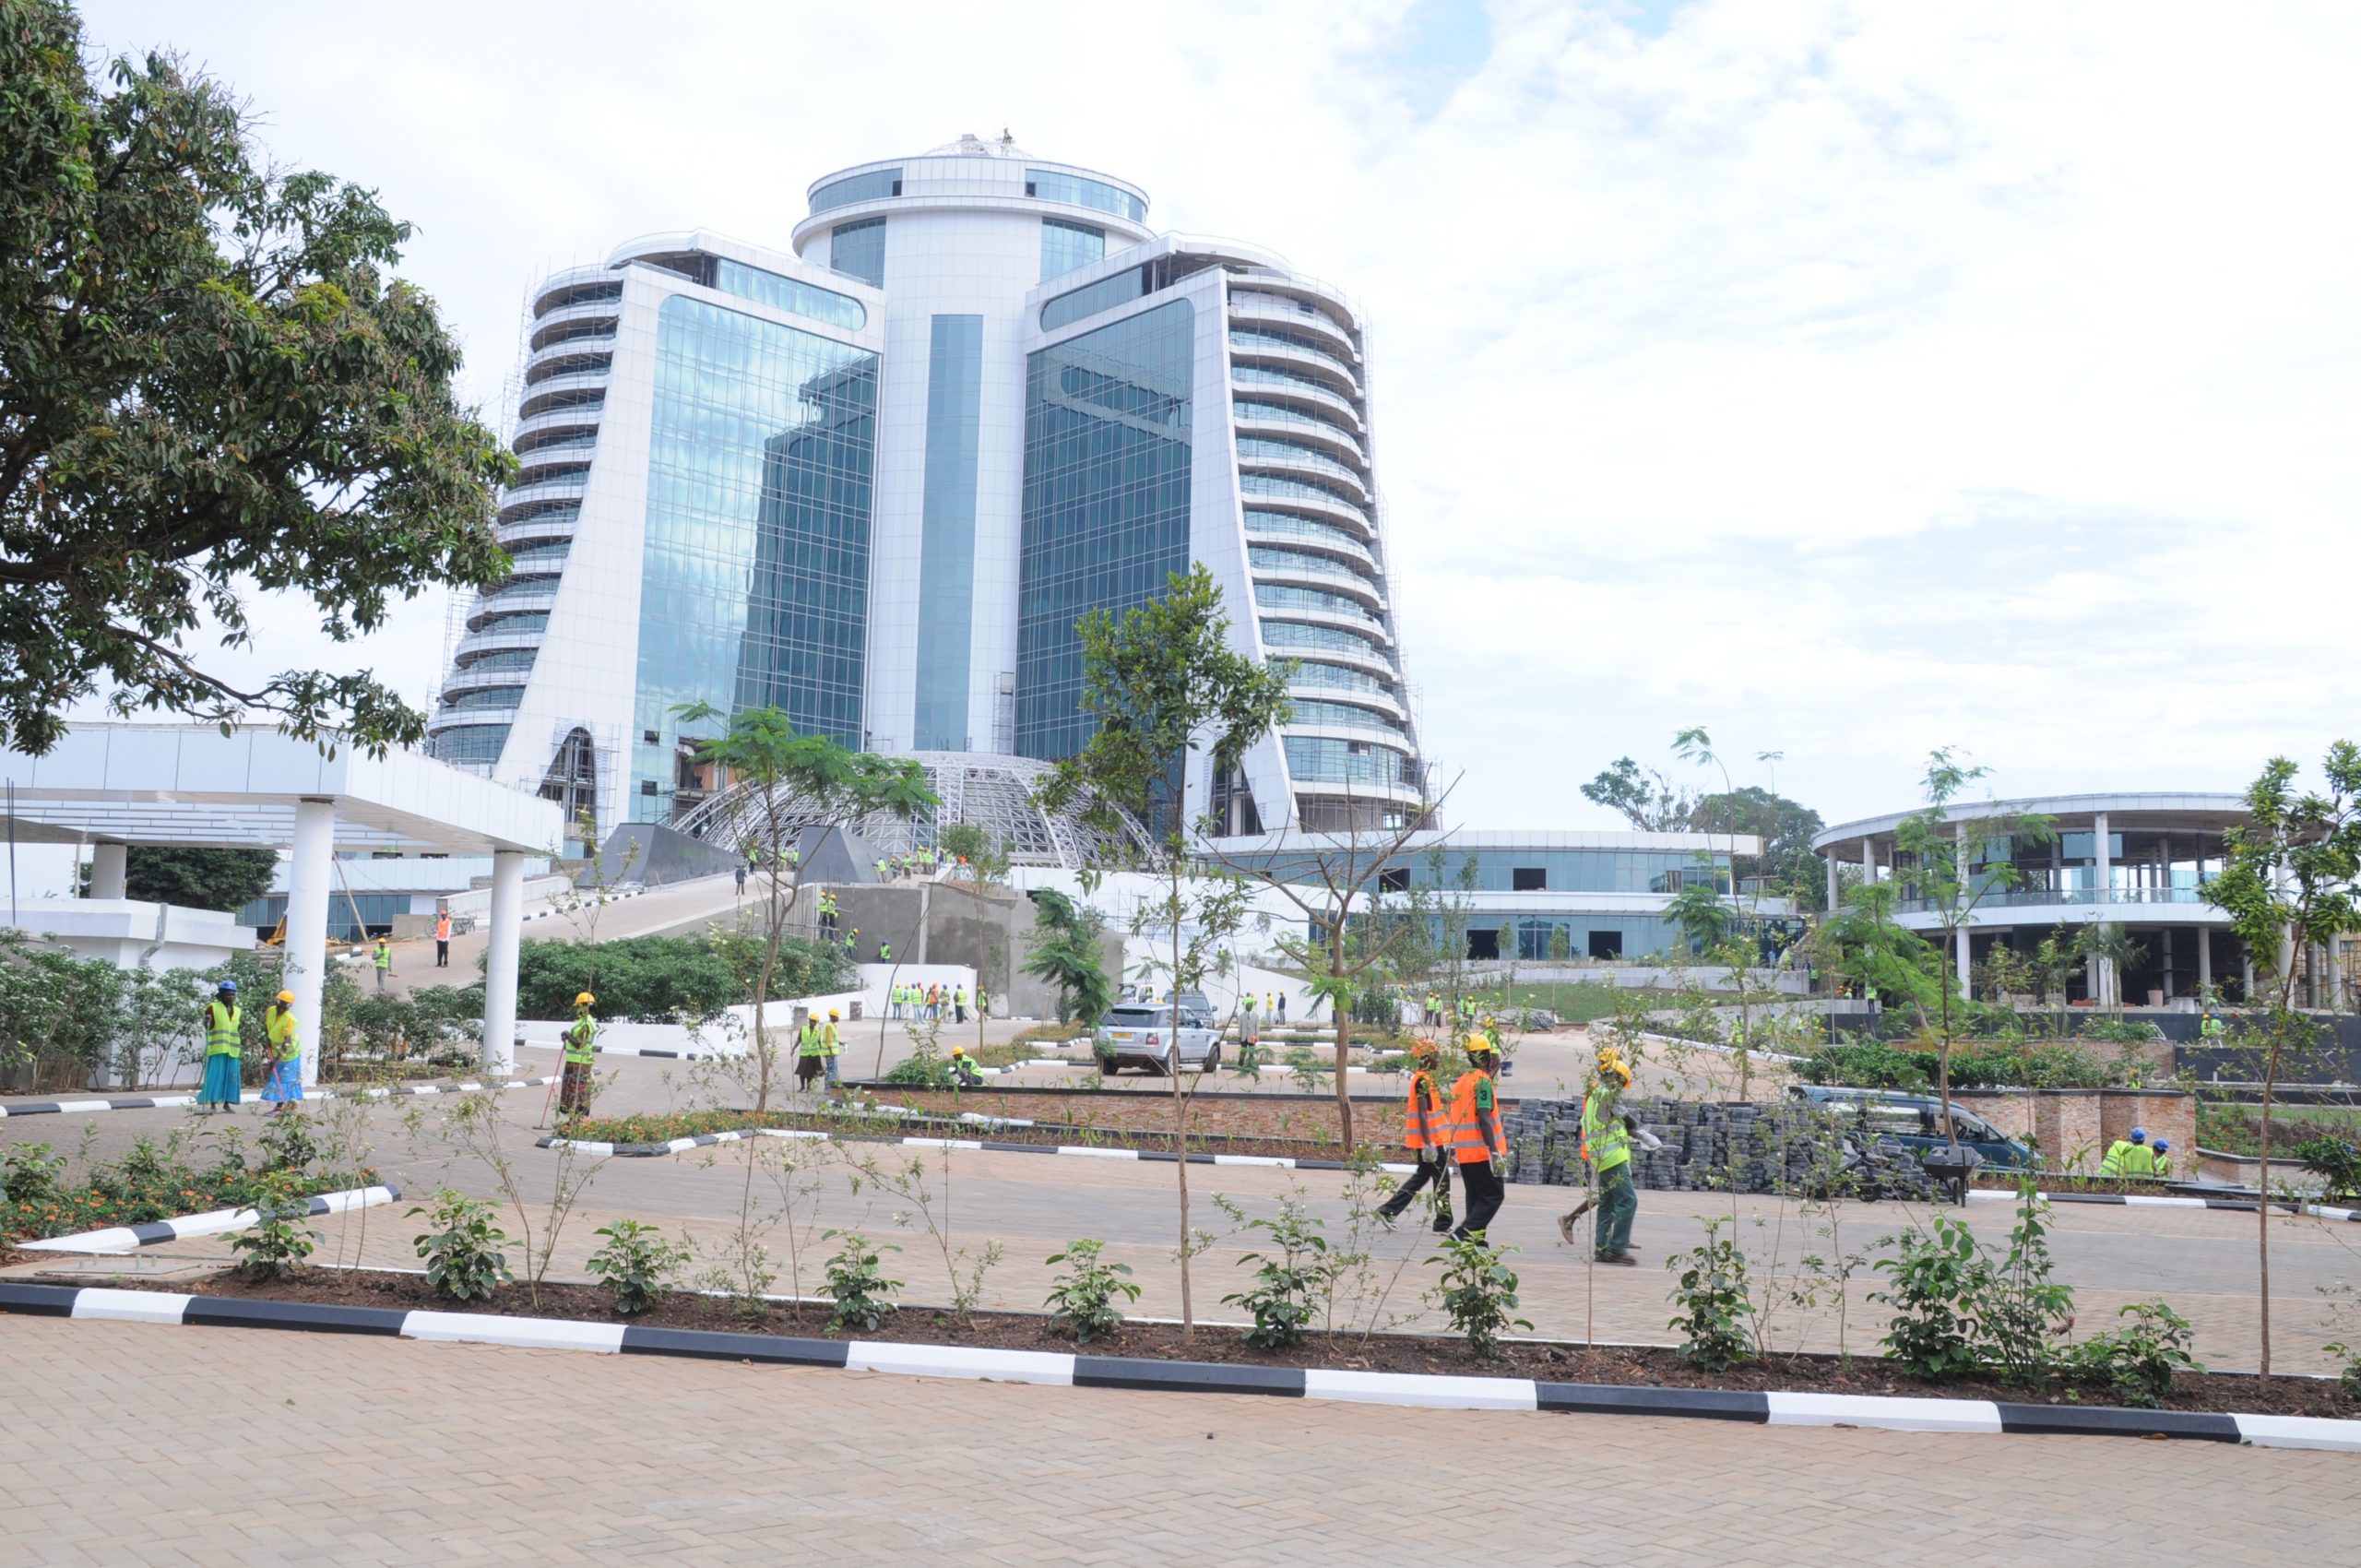 The Pearl of Africa gets a Pearl of Africa Hotel